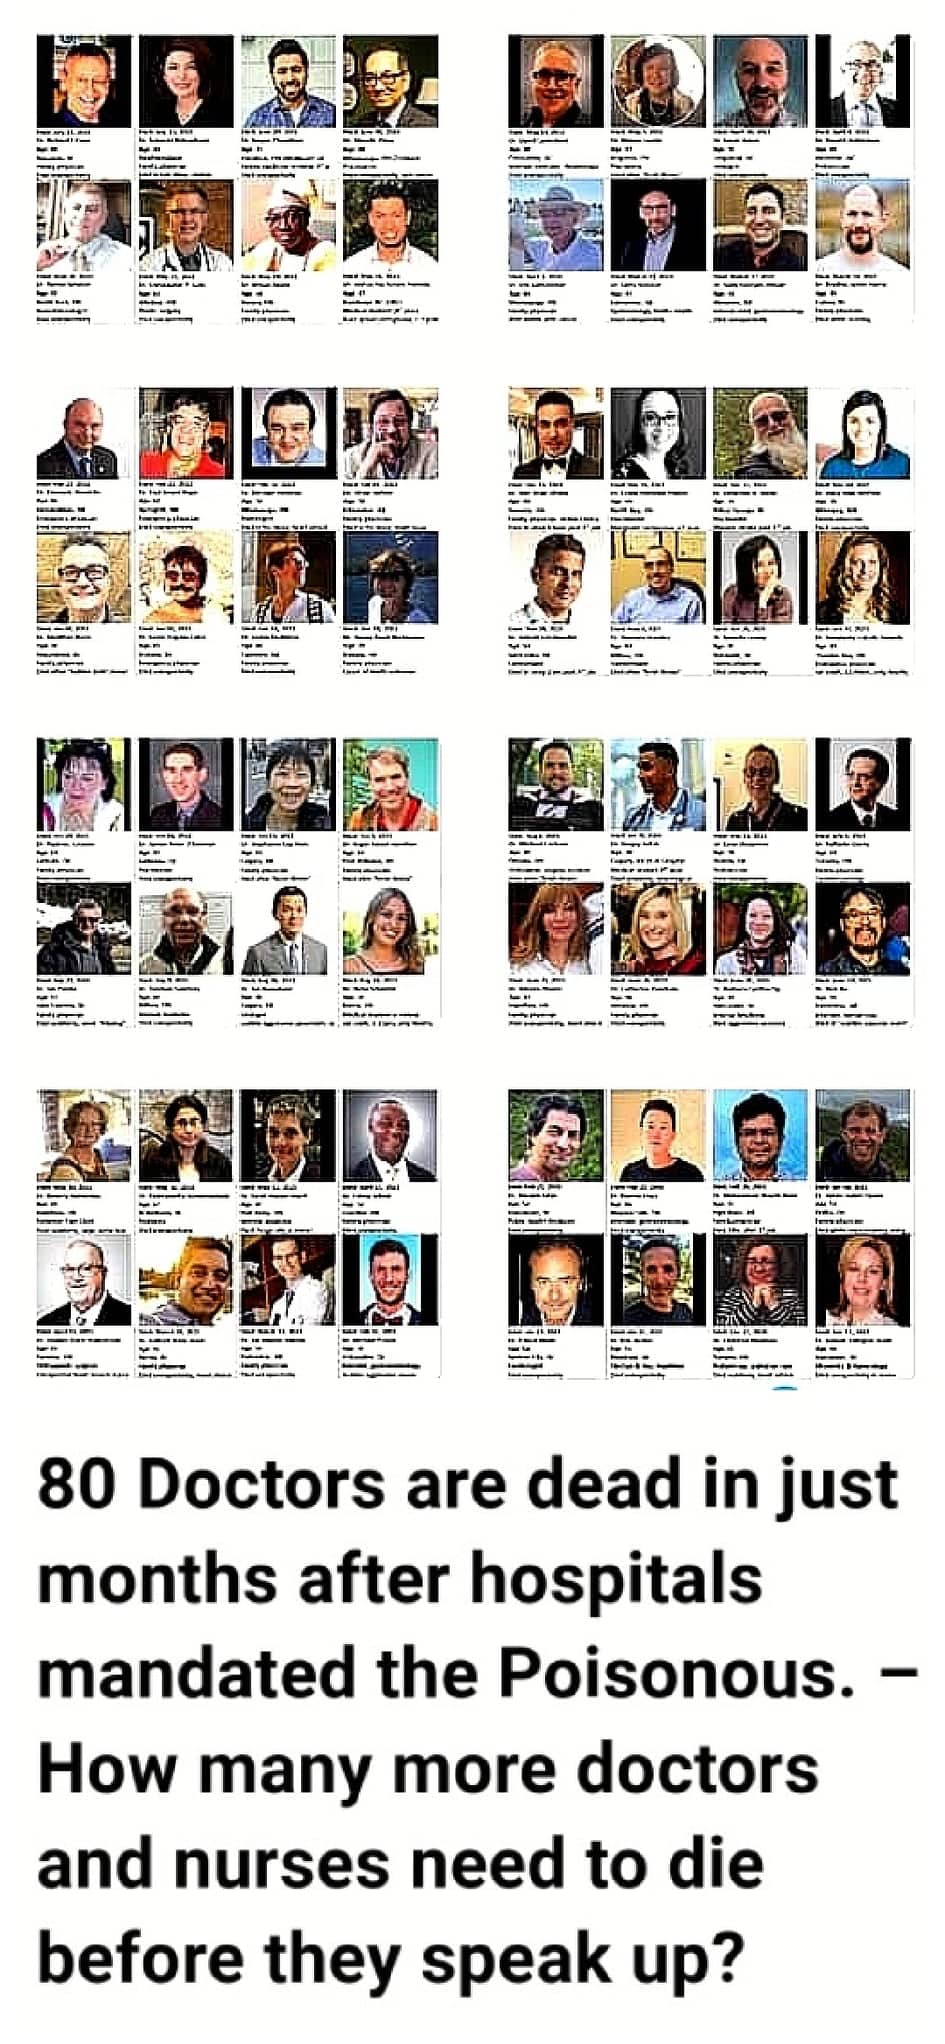 80 Doctors are dead in just months after hospitals mandated the Poisonous. – How many more doctors and nurses need to die before they speak up?